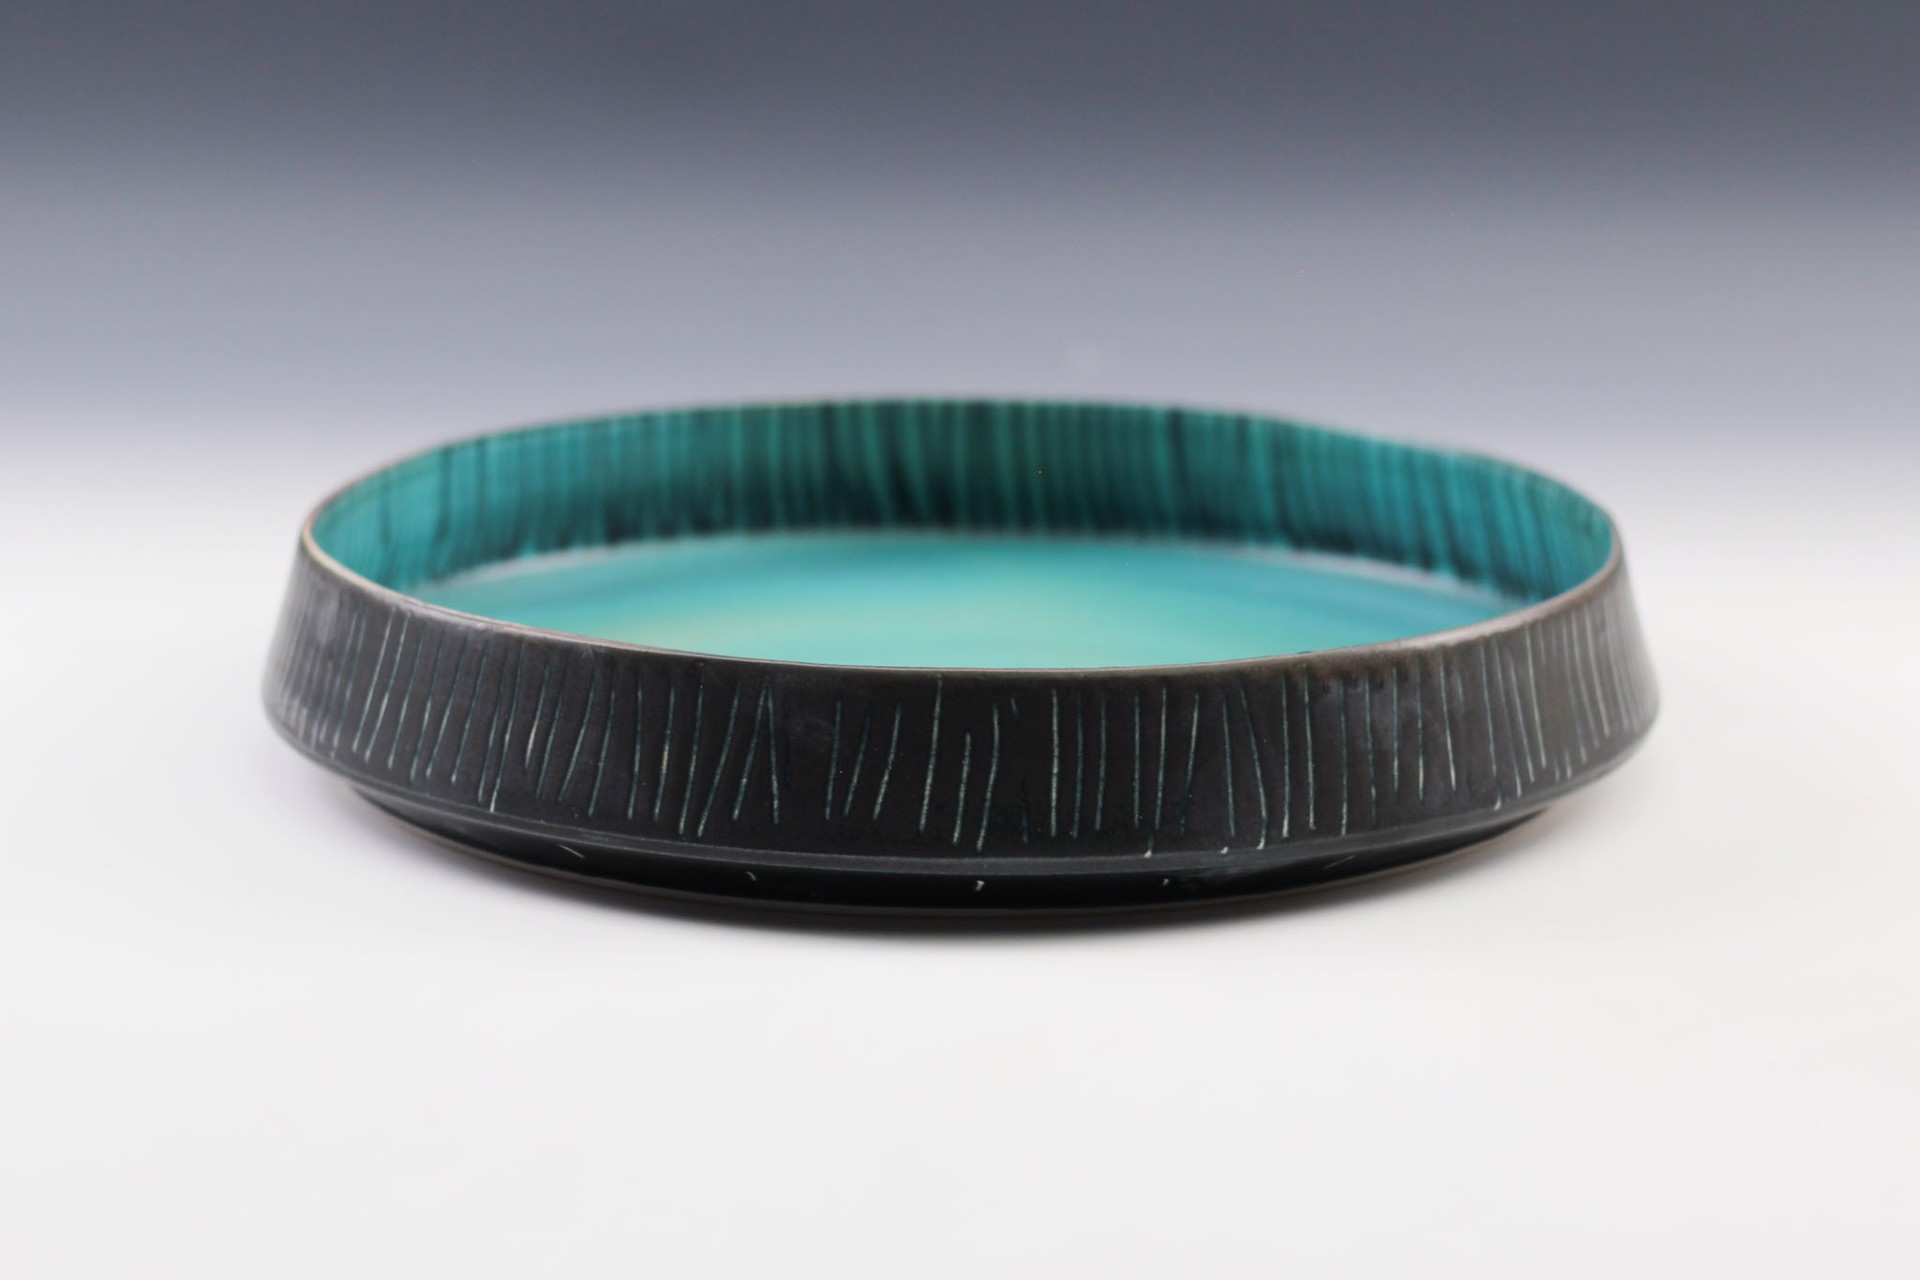 Large Low Bowl by Delores Fortuna